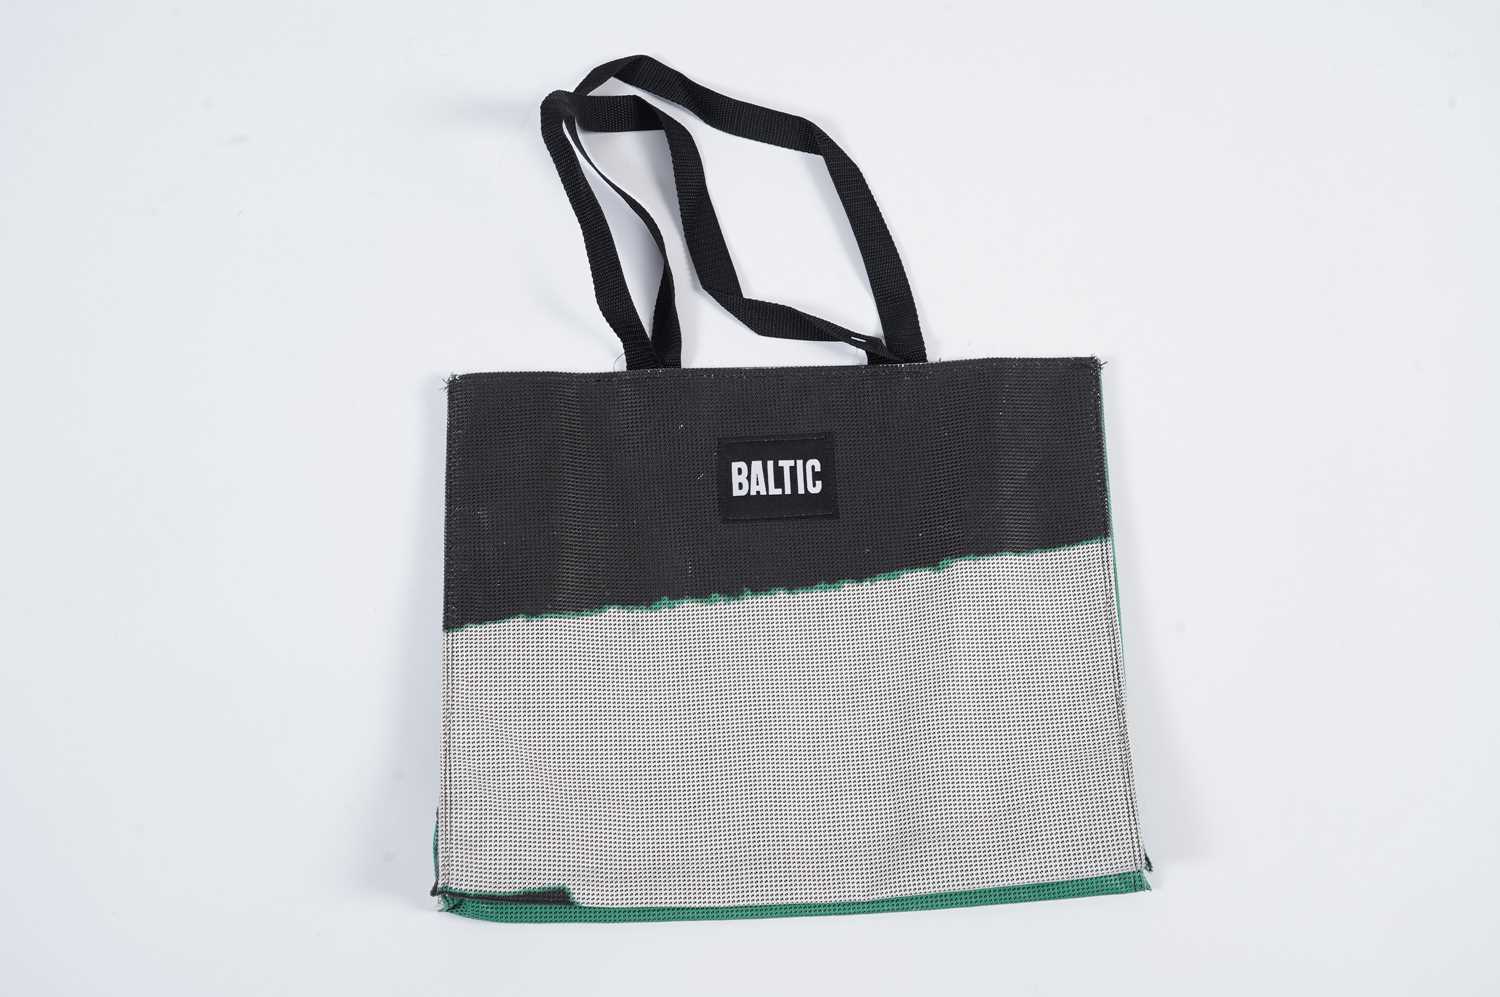 After David Shrigley - YOU CANNOT HELP LOOKING AT THIS | two limited edition BALTIC bags - Image 3 of 10